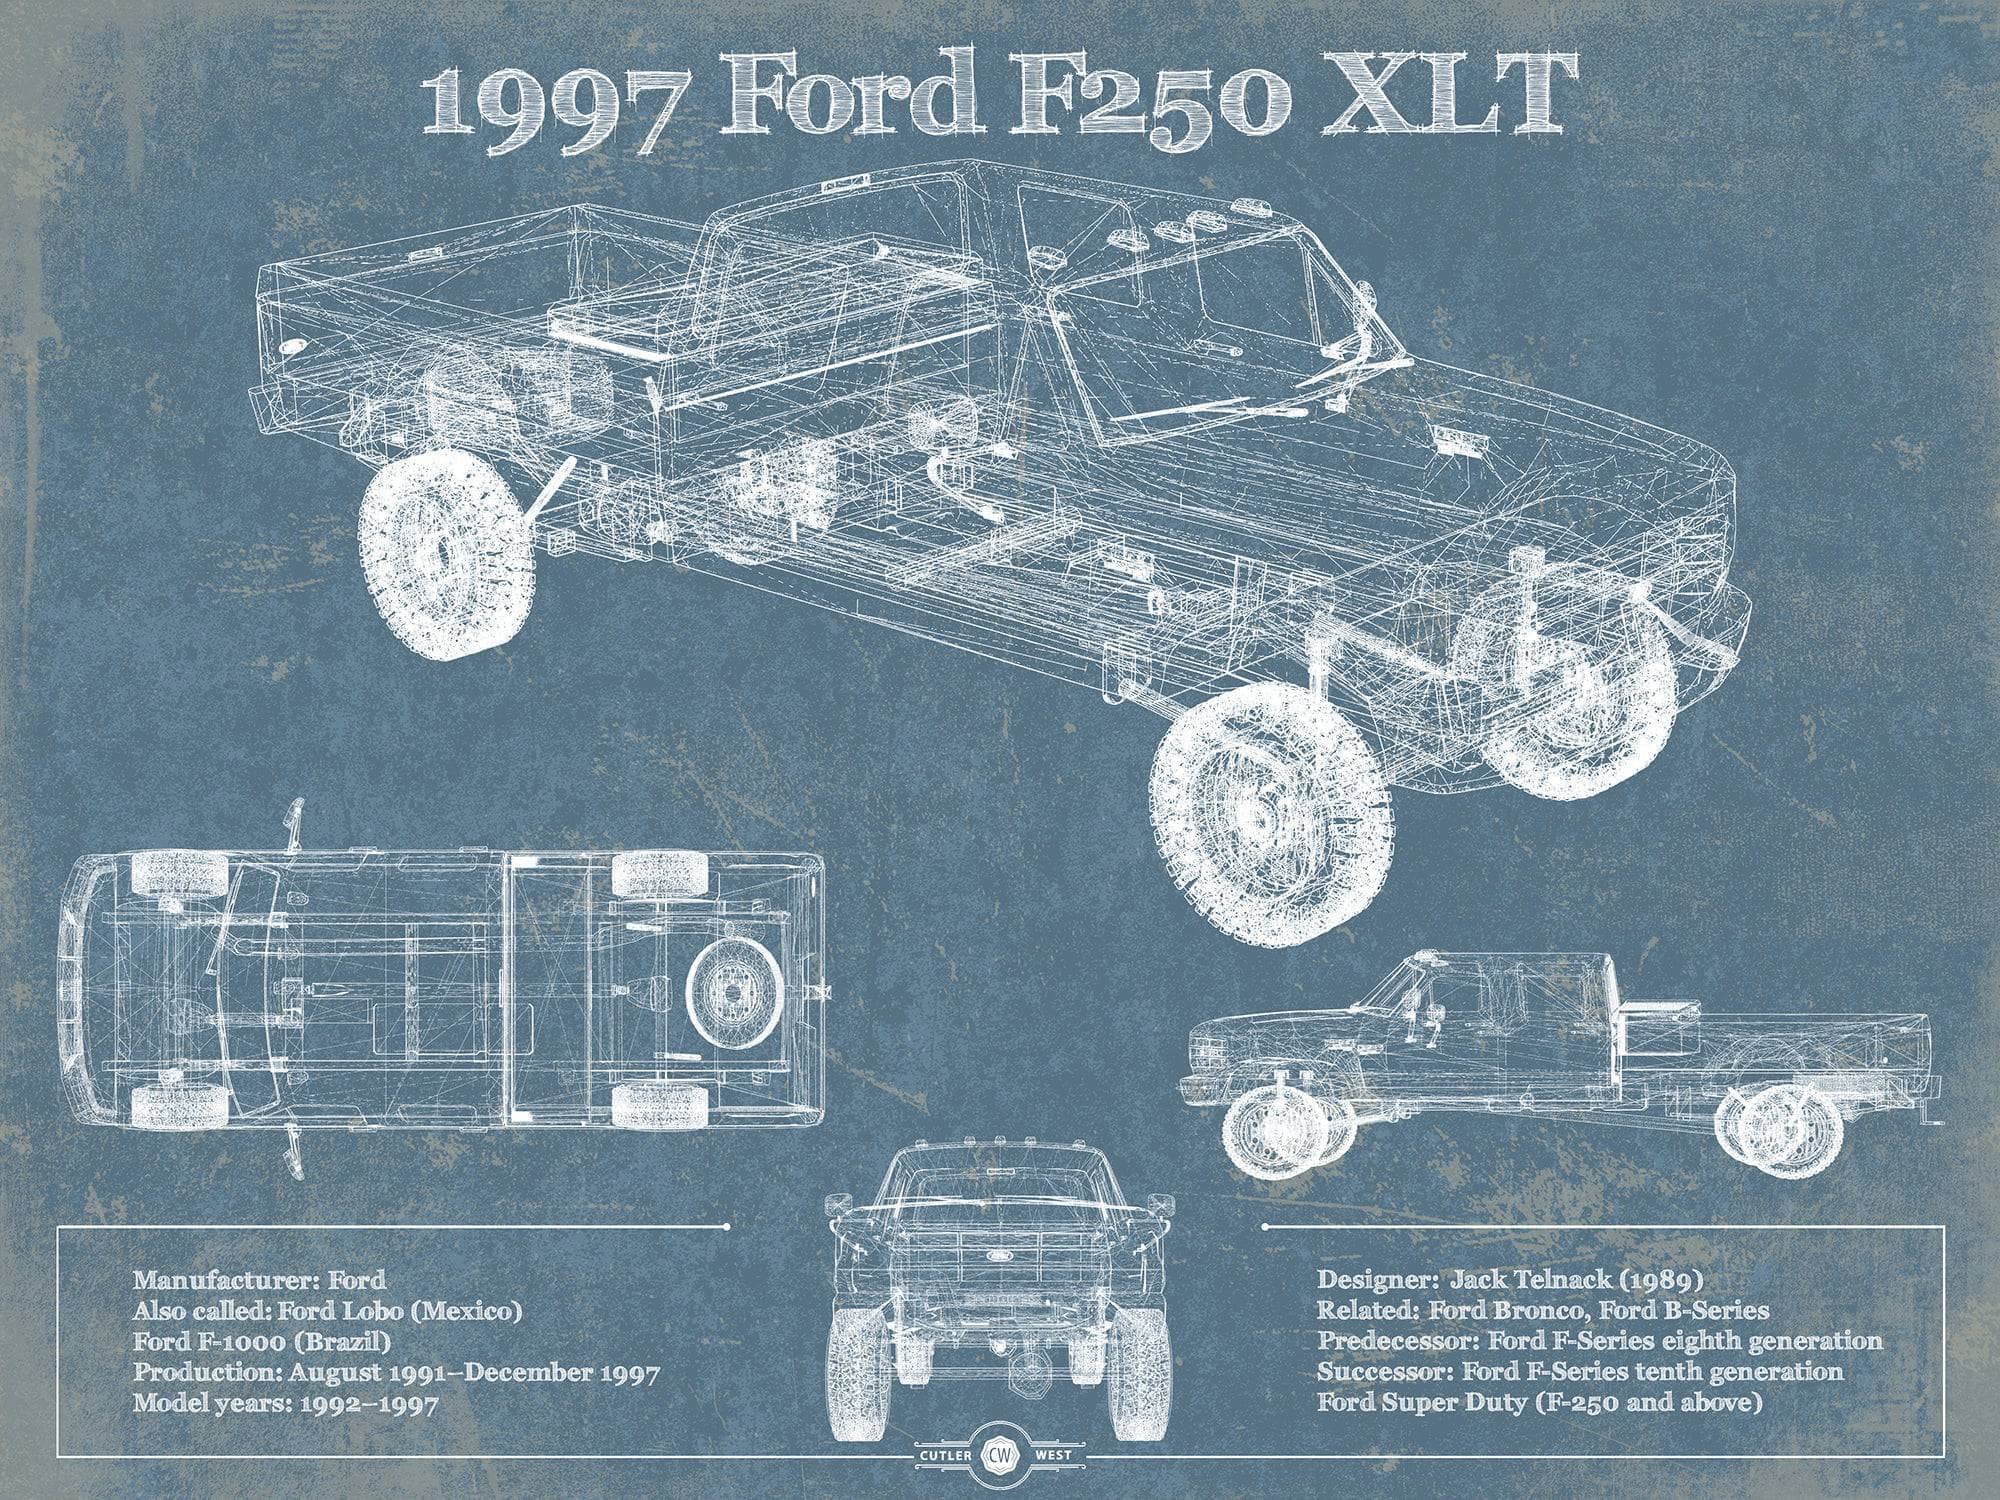 Cutler West Ford Collection 1997 Ford F250 XLT Vintage Blueprint Auto Print